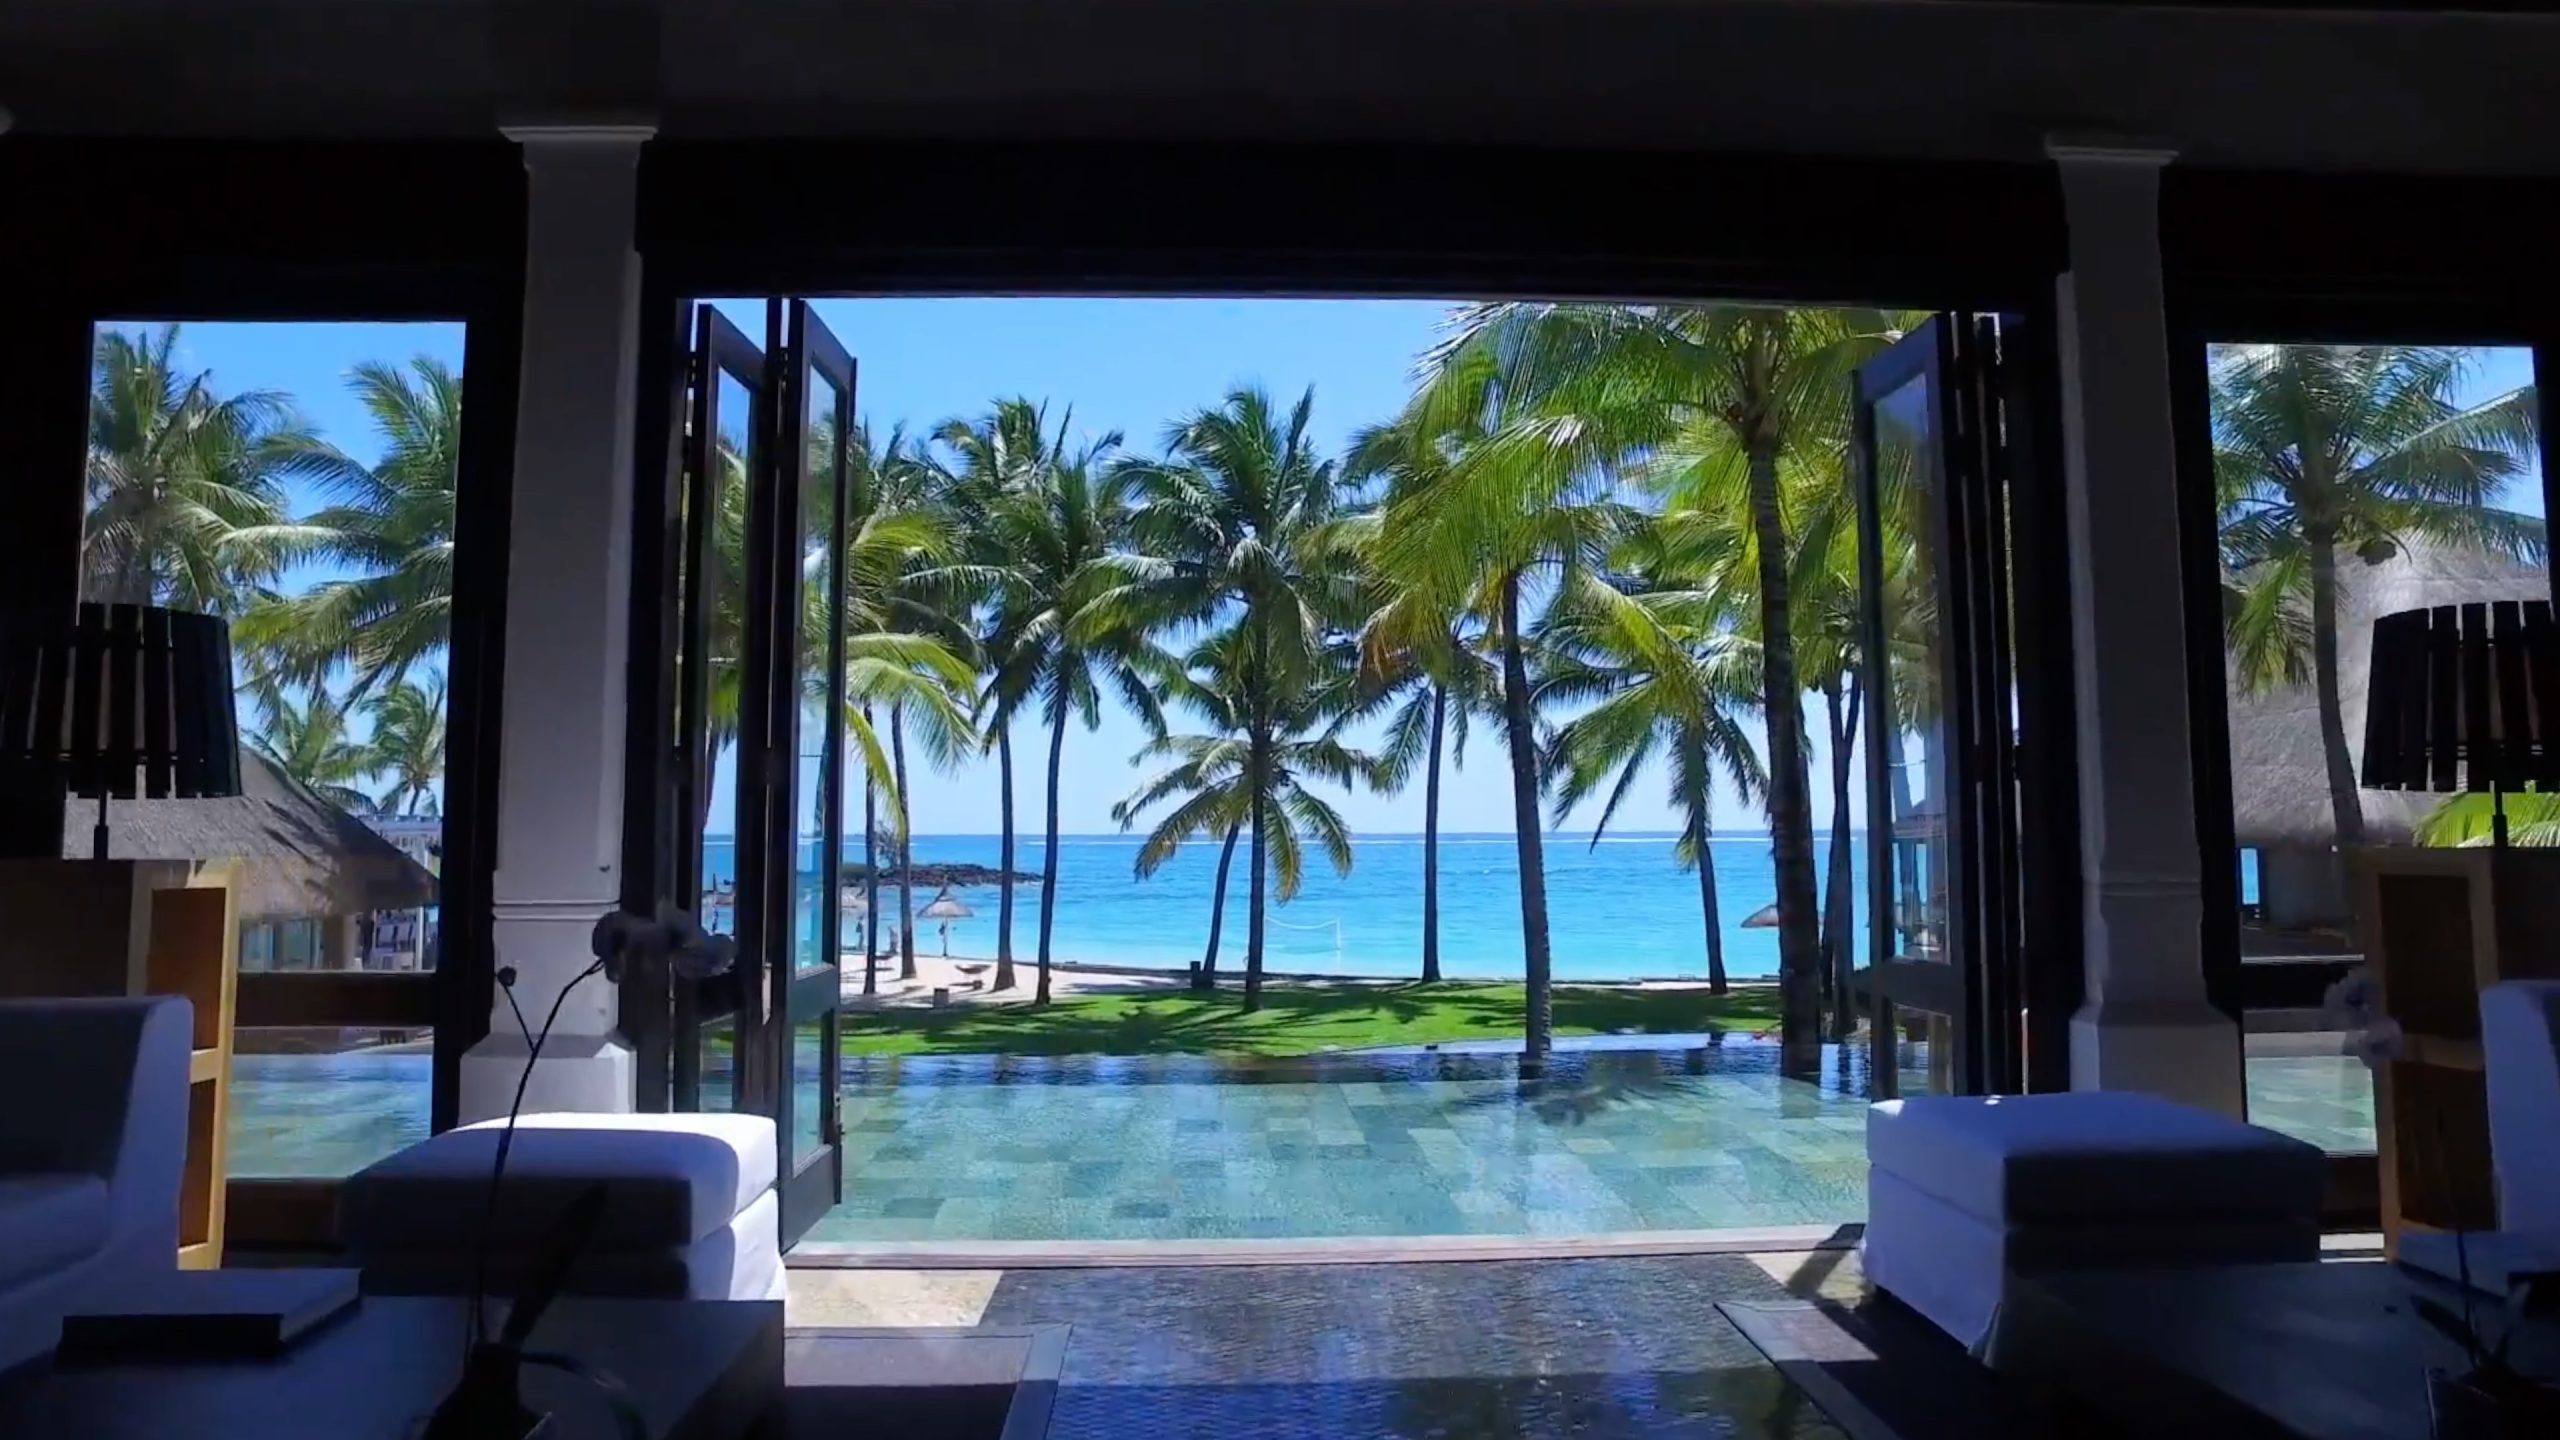 Constance Belle Mare Plage Resort - Mauritius - The Place To Be